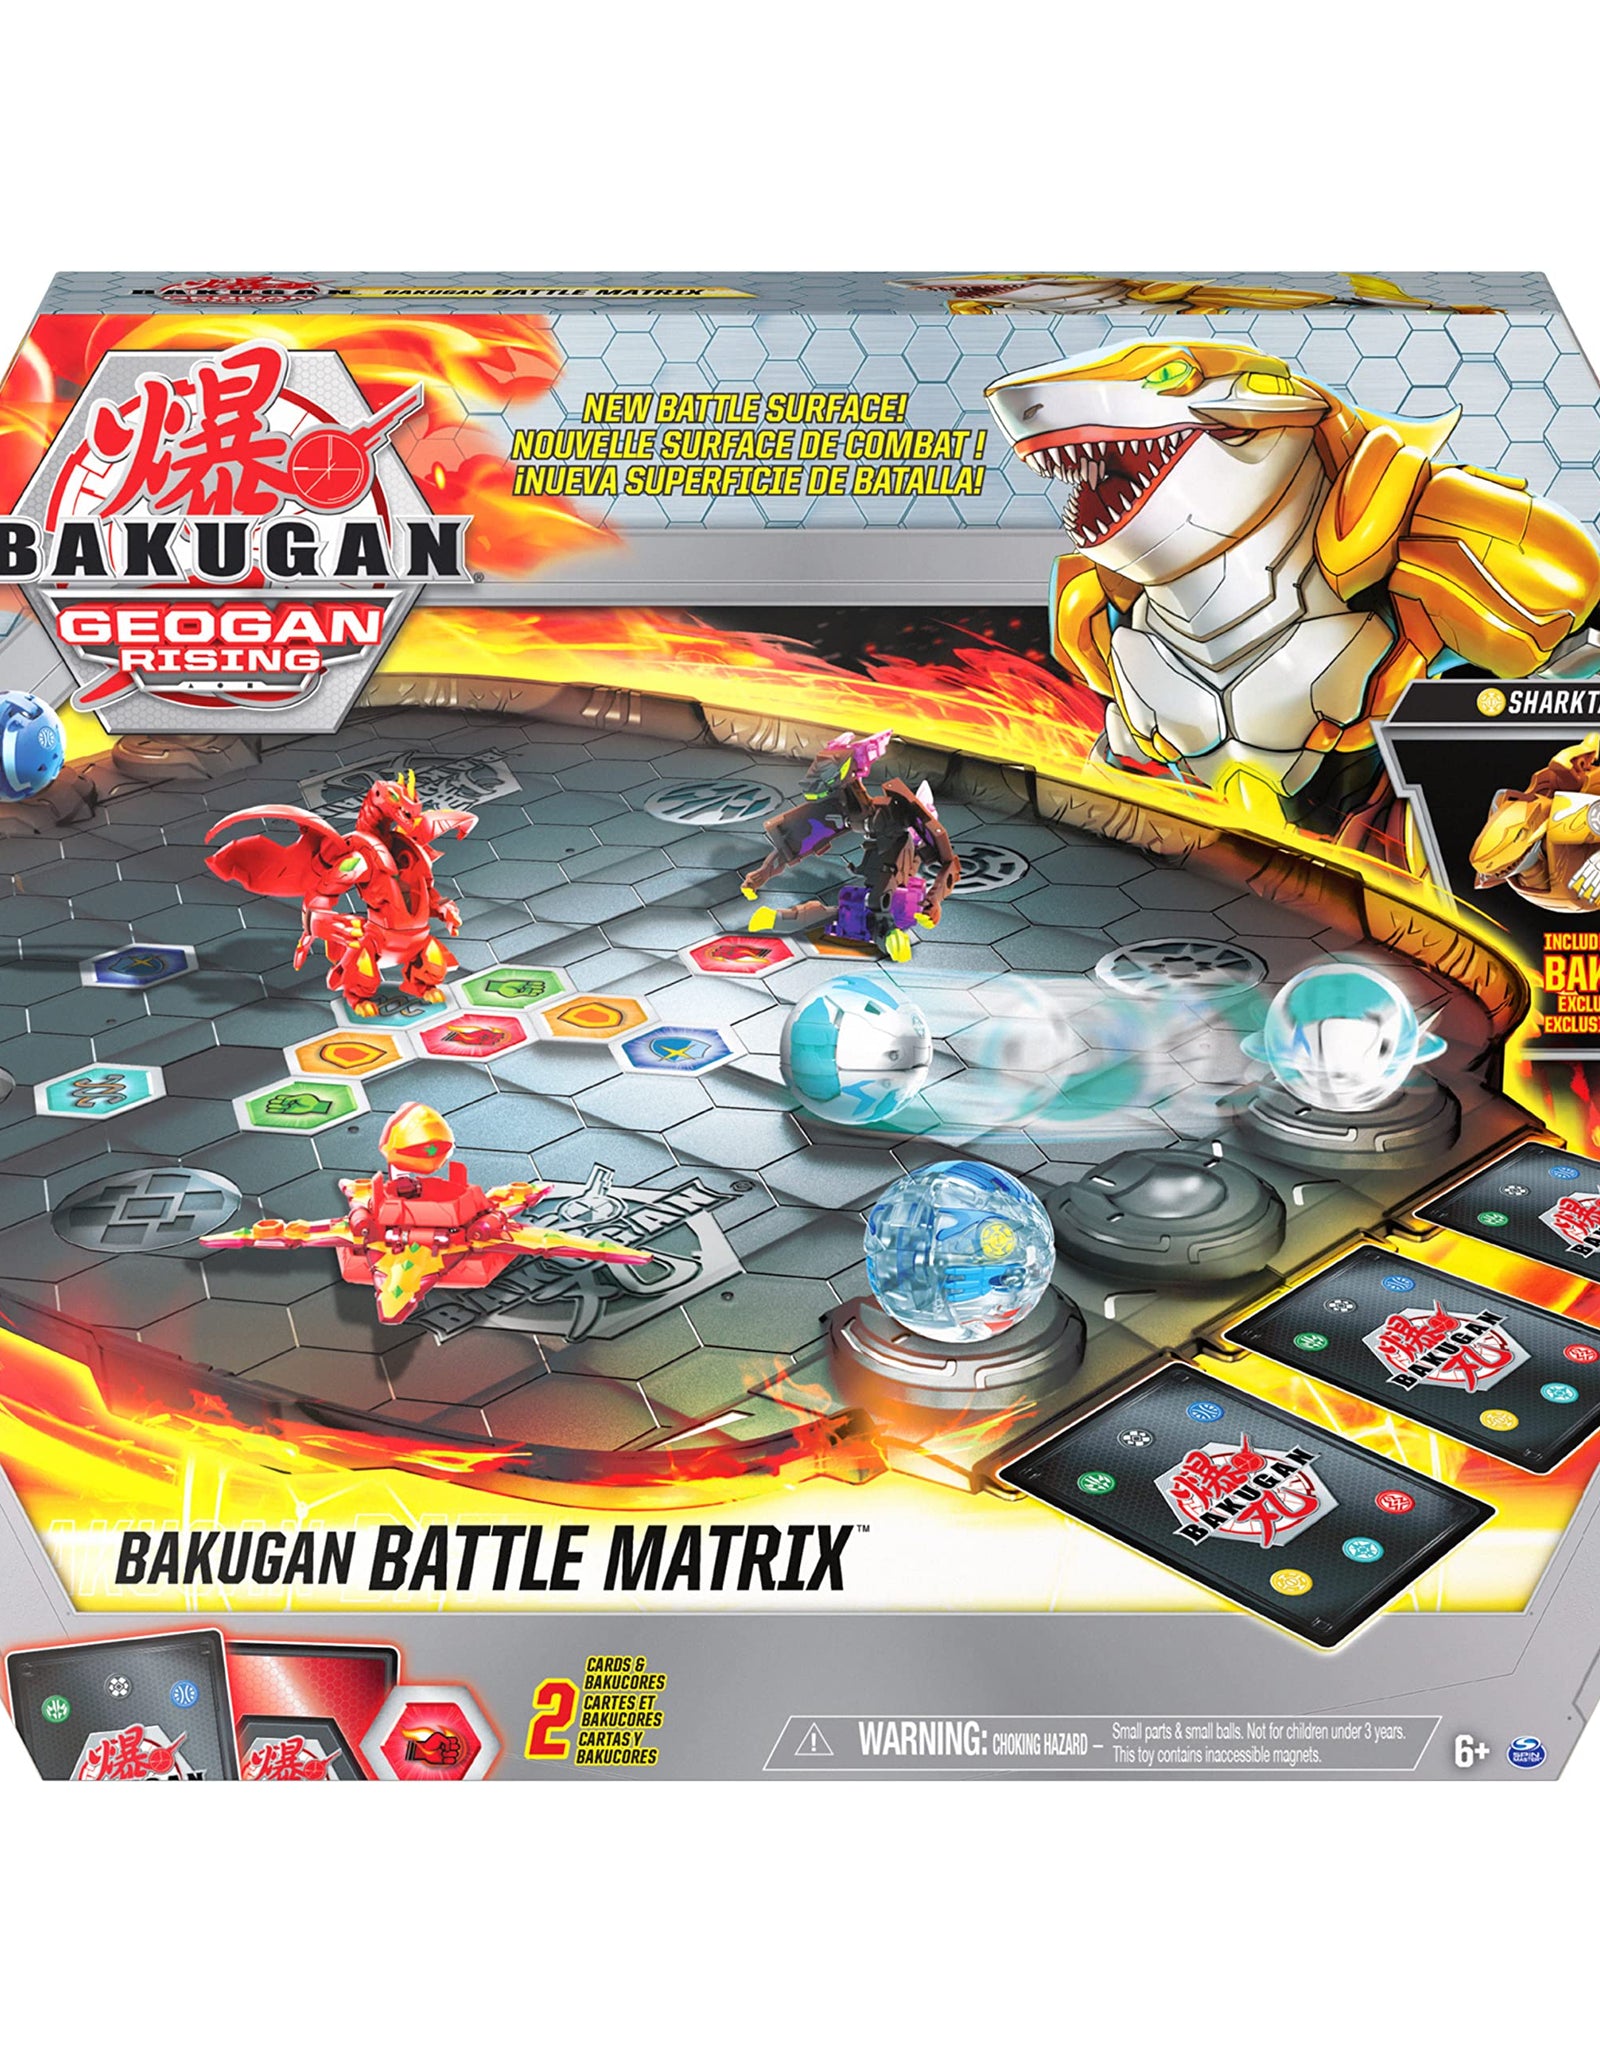 Bakugan Battle Matrix, Deluxe Game Board with Exclusive Gold Sharktar, Kids Toys for Boys Aged 6 and up